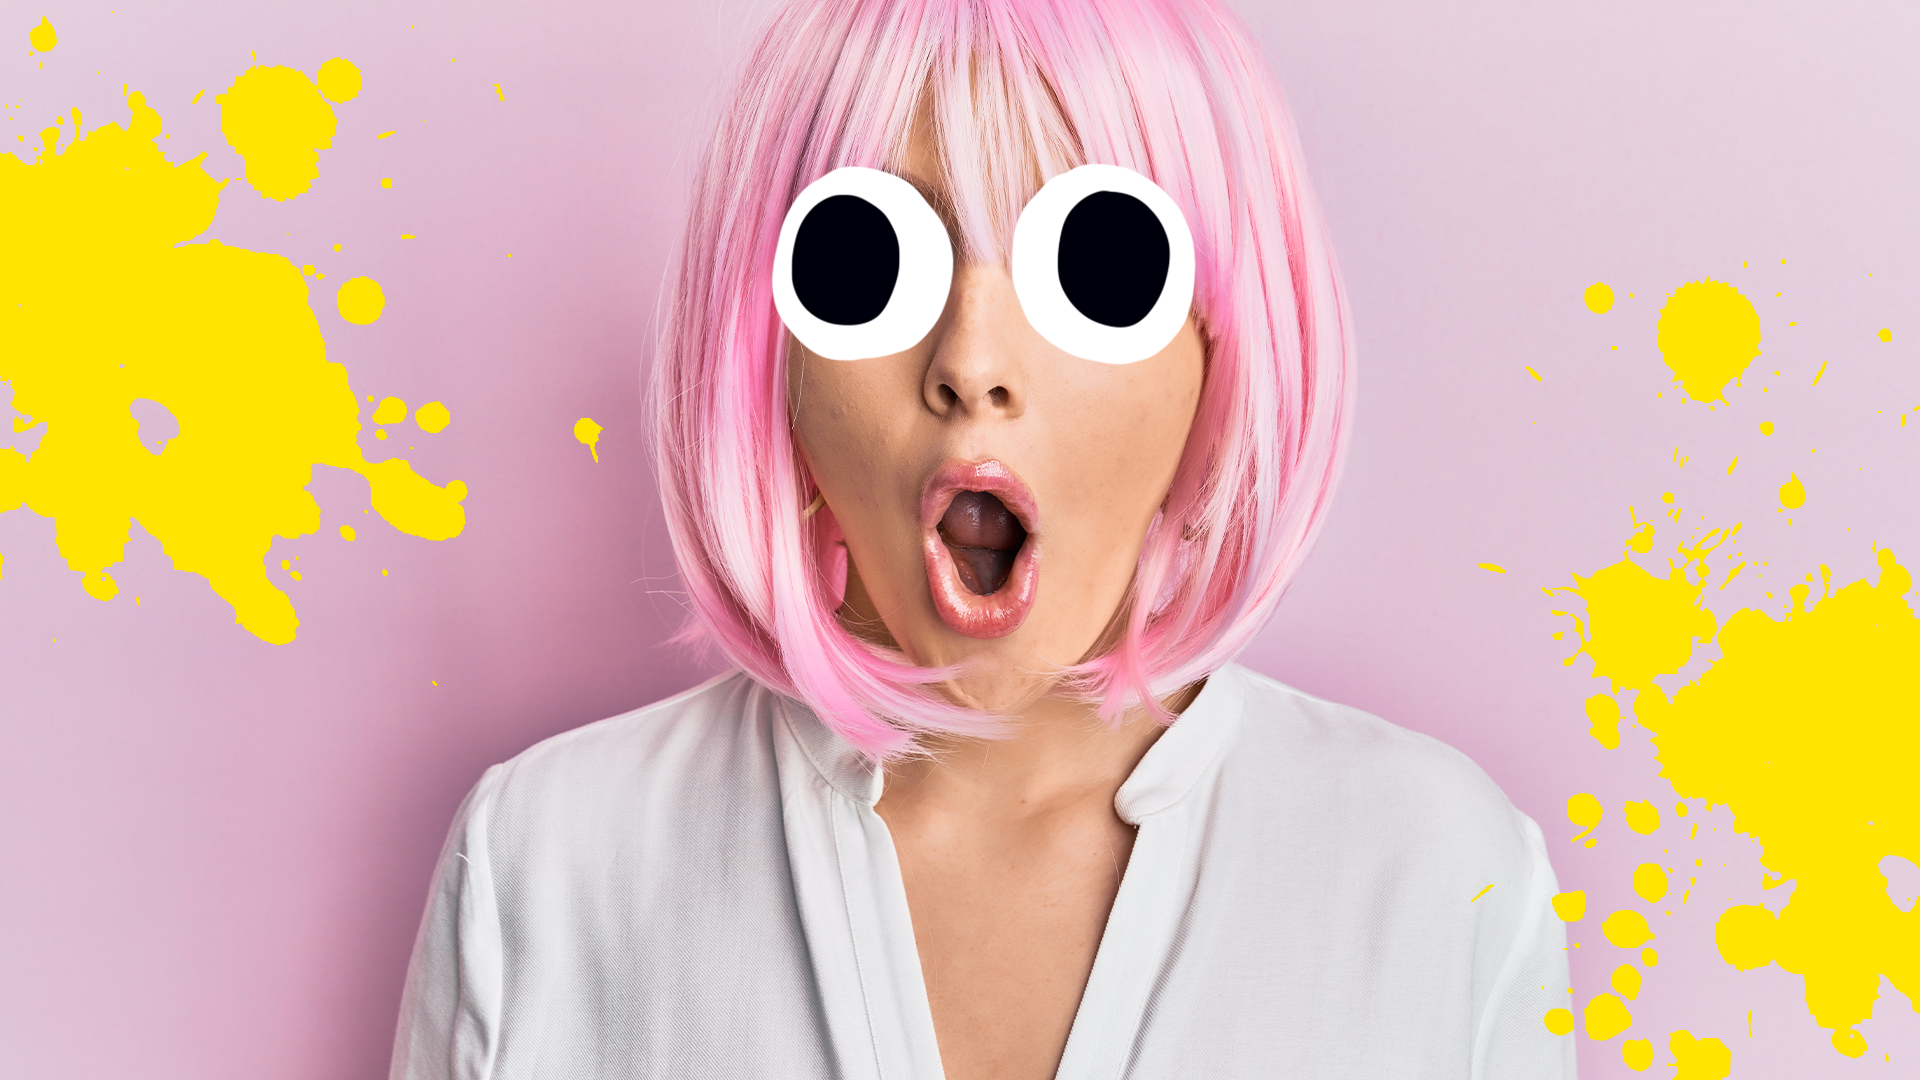 A woman with pink hair looking shocked and splats